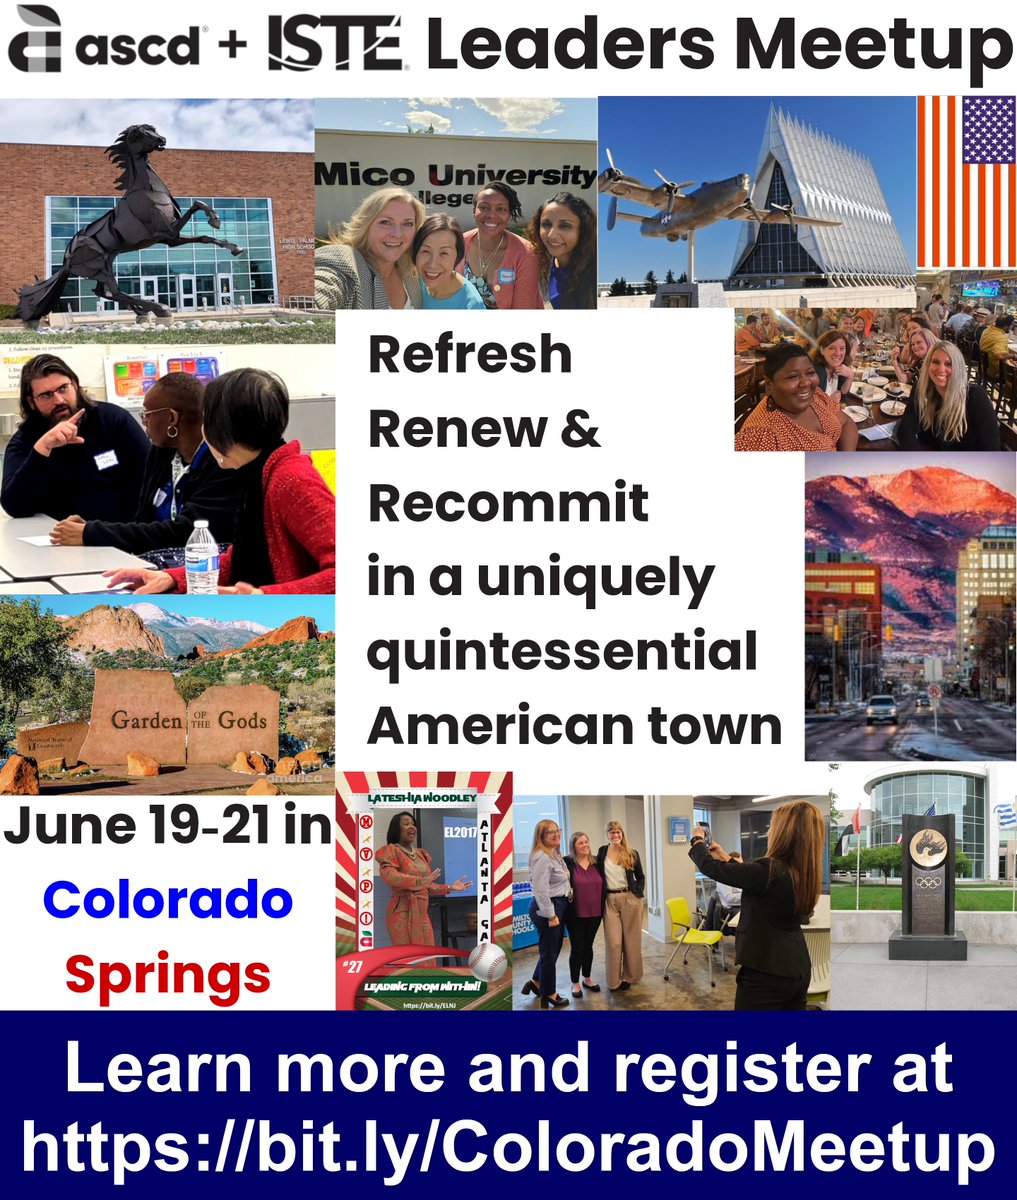 Register now to join us in 26 days! COlorado Springs is calling! bit.ly/ColoradoMeetup #ASCDAffiliates #ISTEAffiliates #ASCDEdChamps #ASCDEmergingLeaders #ASCDStudentChapters